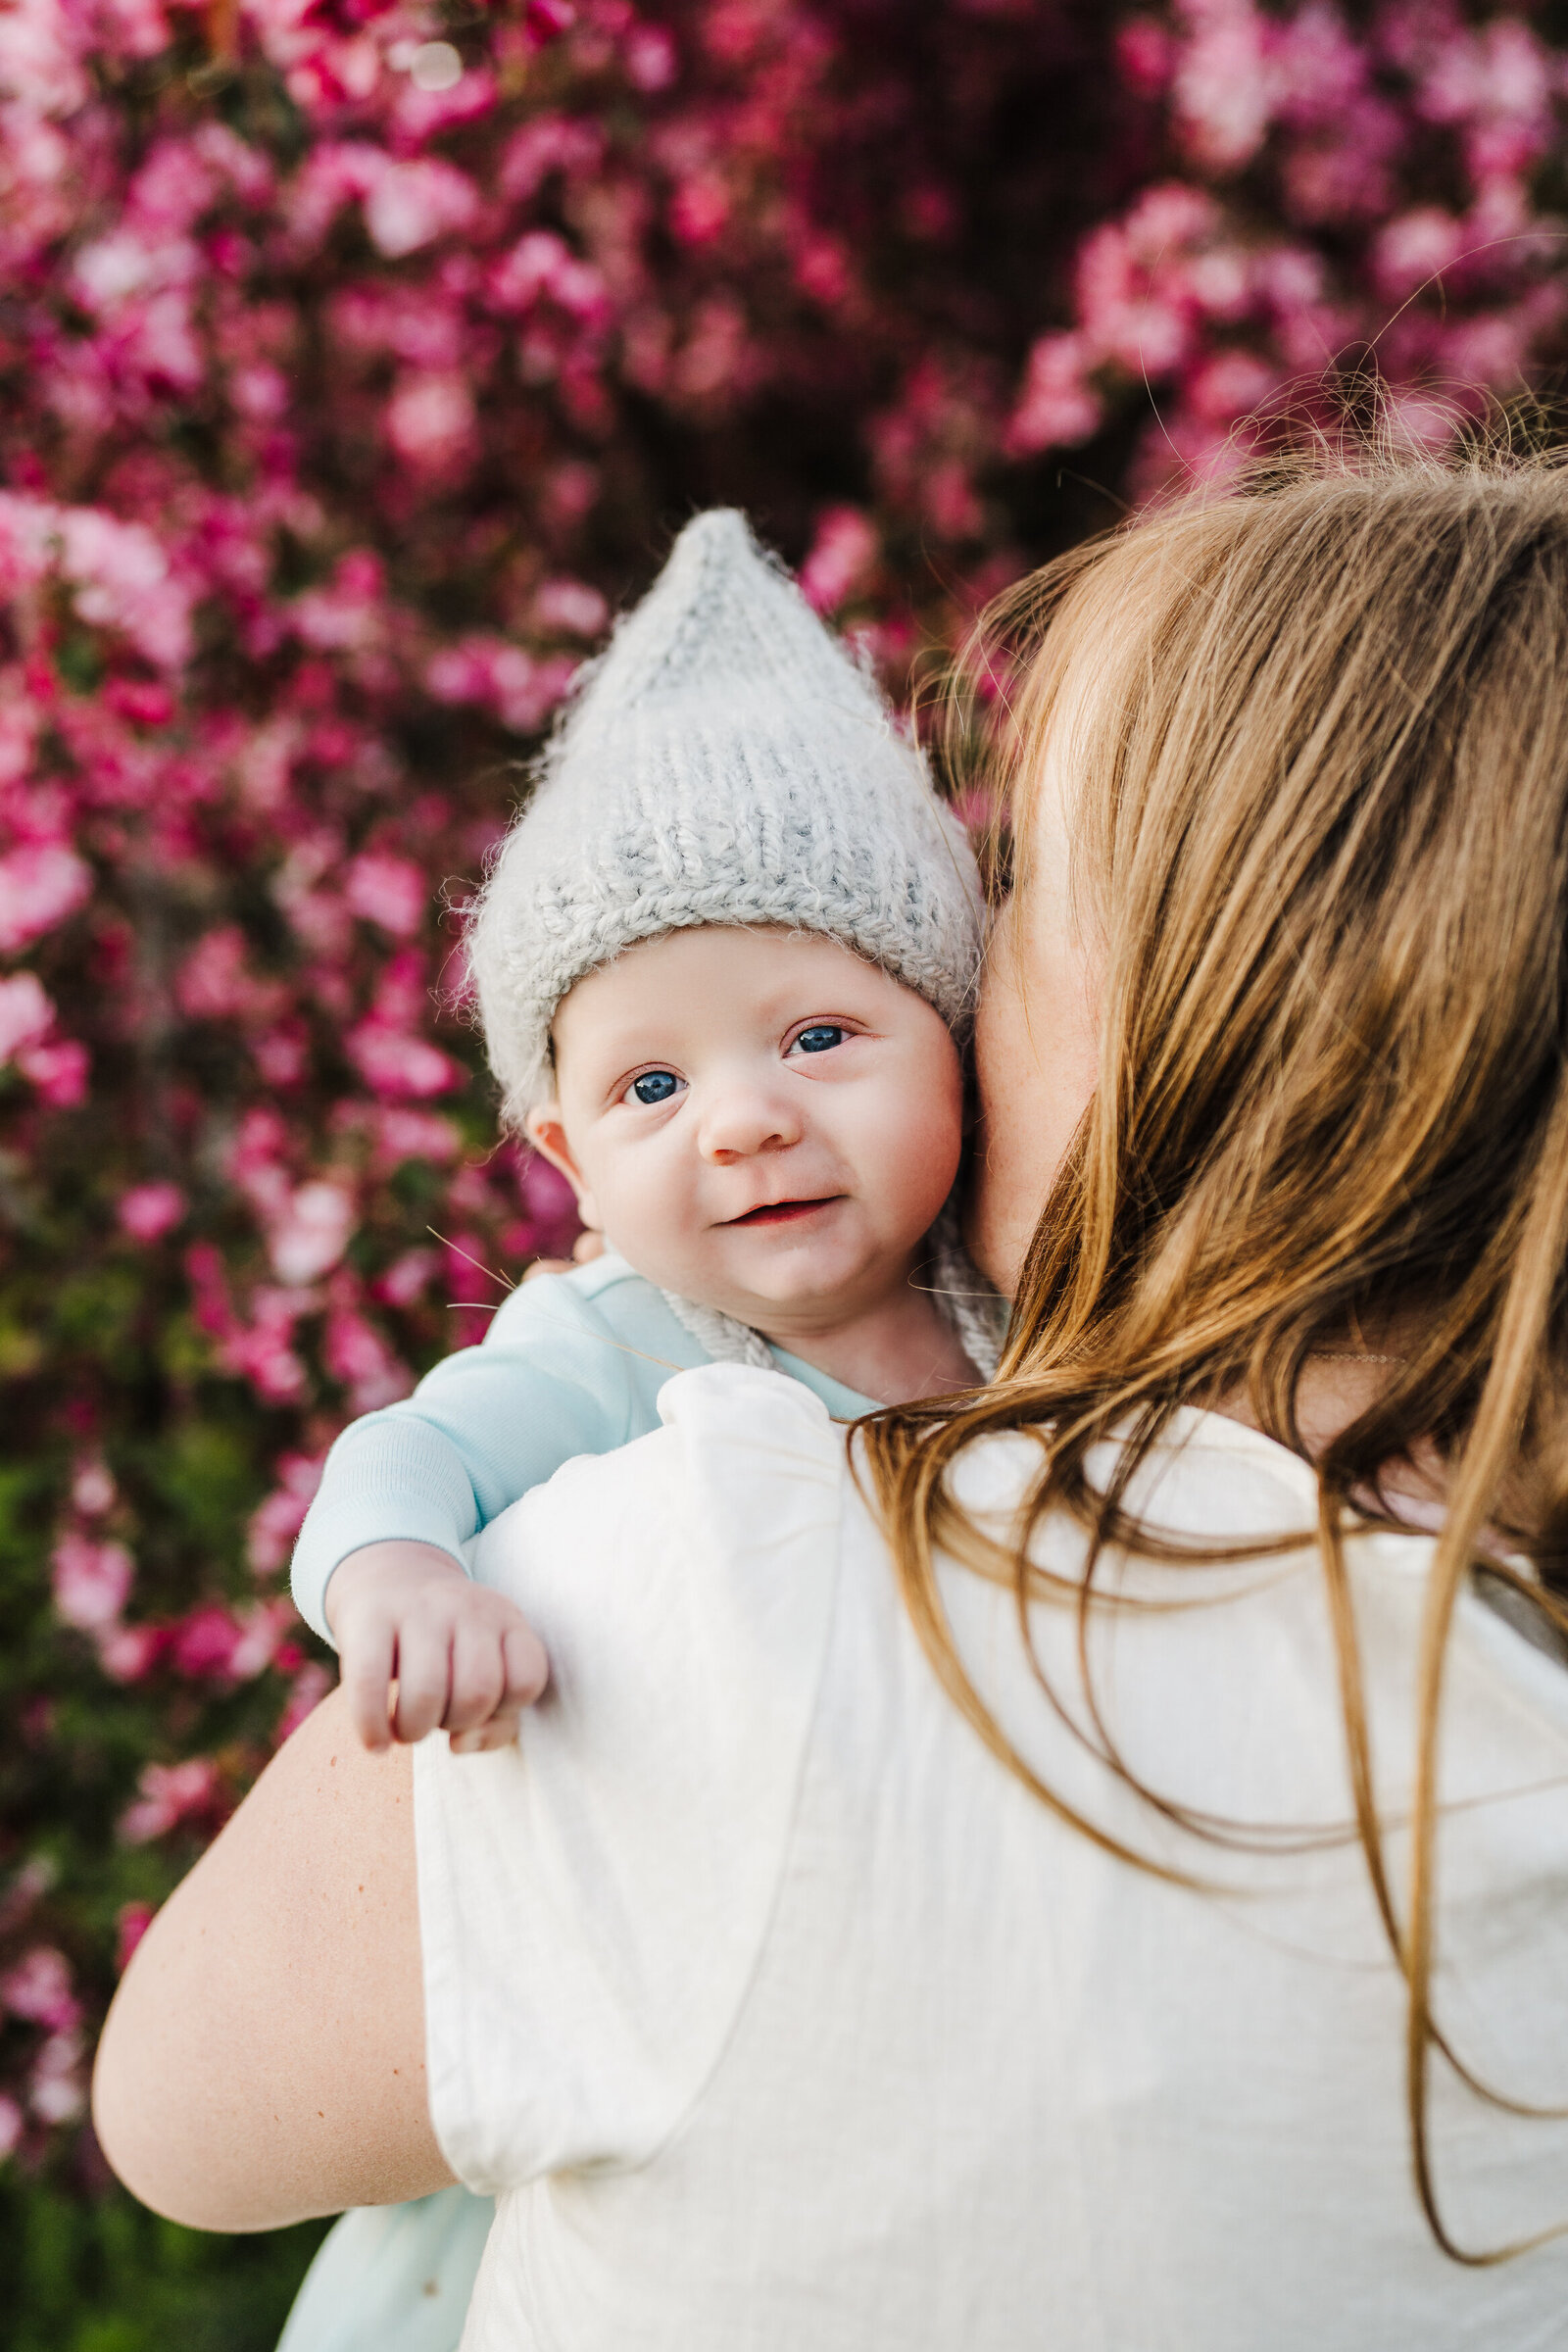 baby in wool hat looks over moms shoulder with blossoming trees